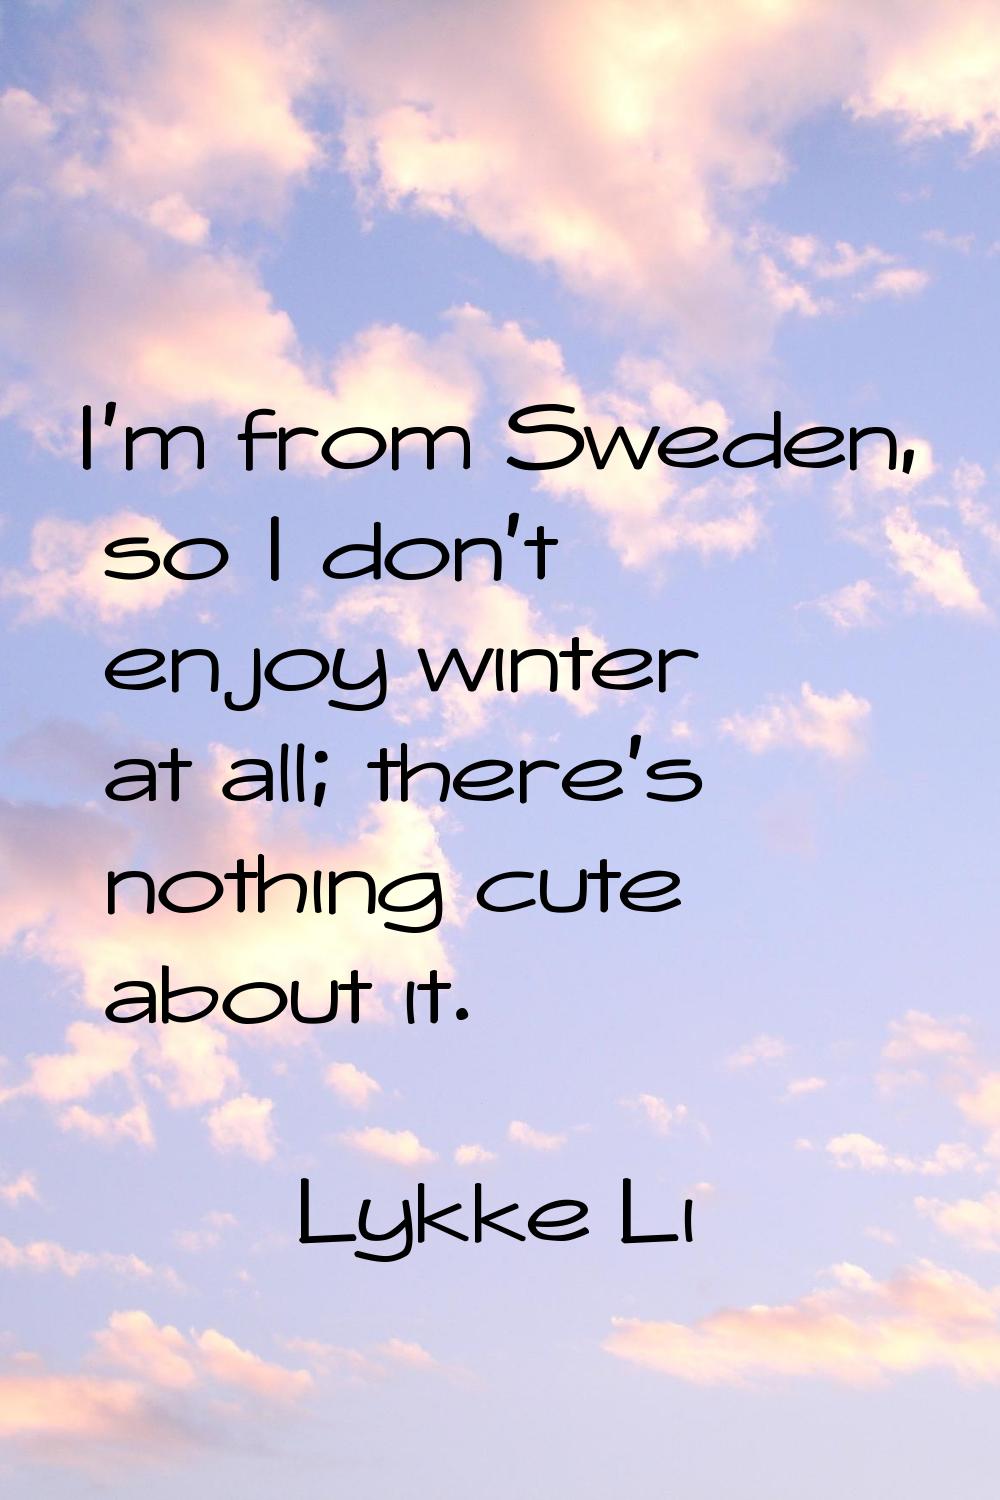 I'm from Sweden, so I don't enjoy winter at all; there's nothing cute about it.